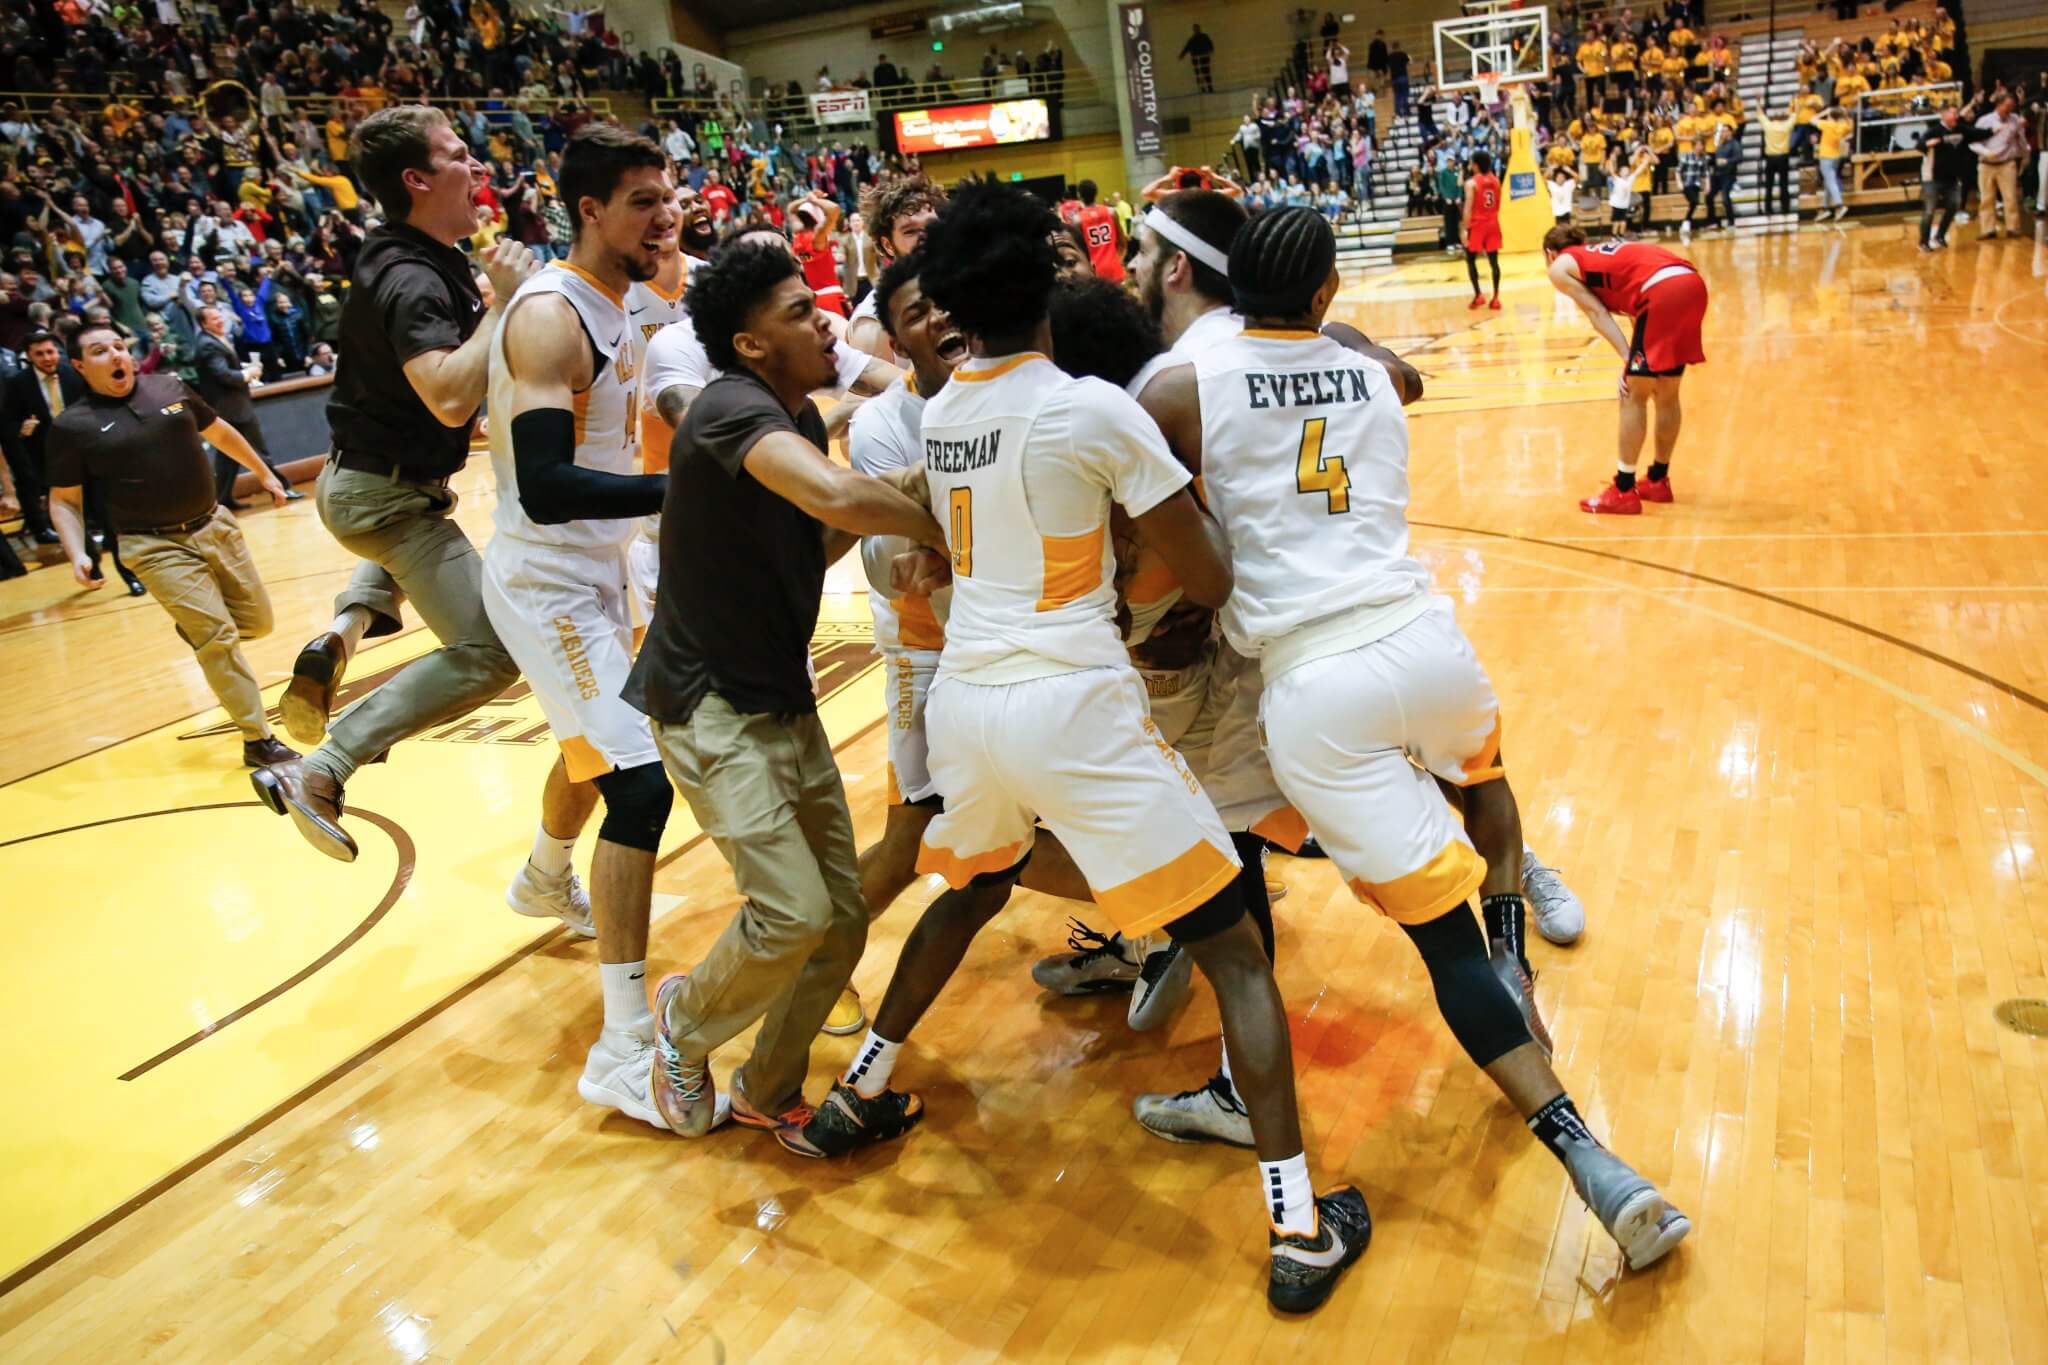 Valparaiso celebrates after beating Illinois State 58-56 on a stunning buzzer-beater by guard Markus Golder.